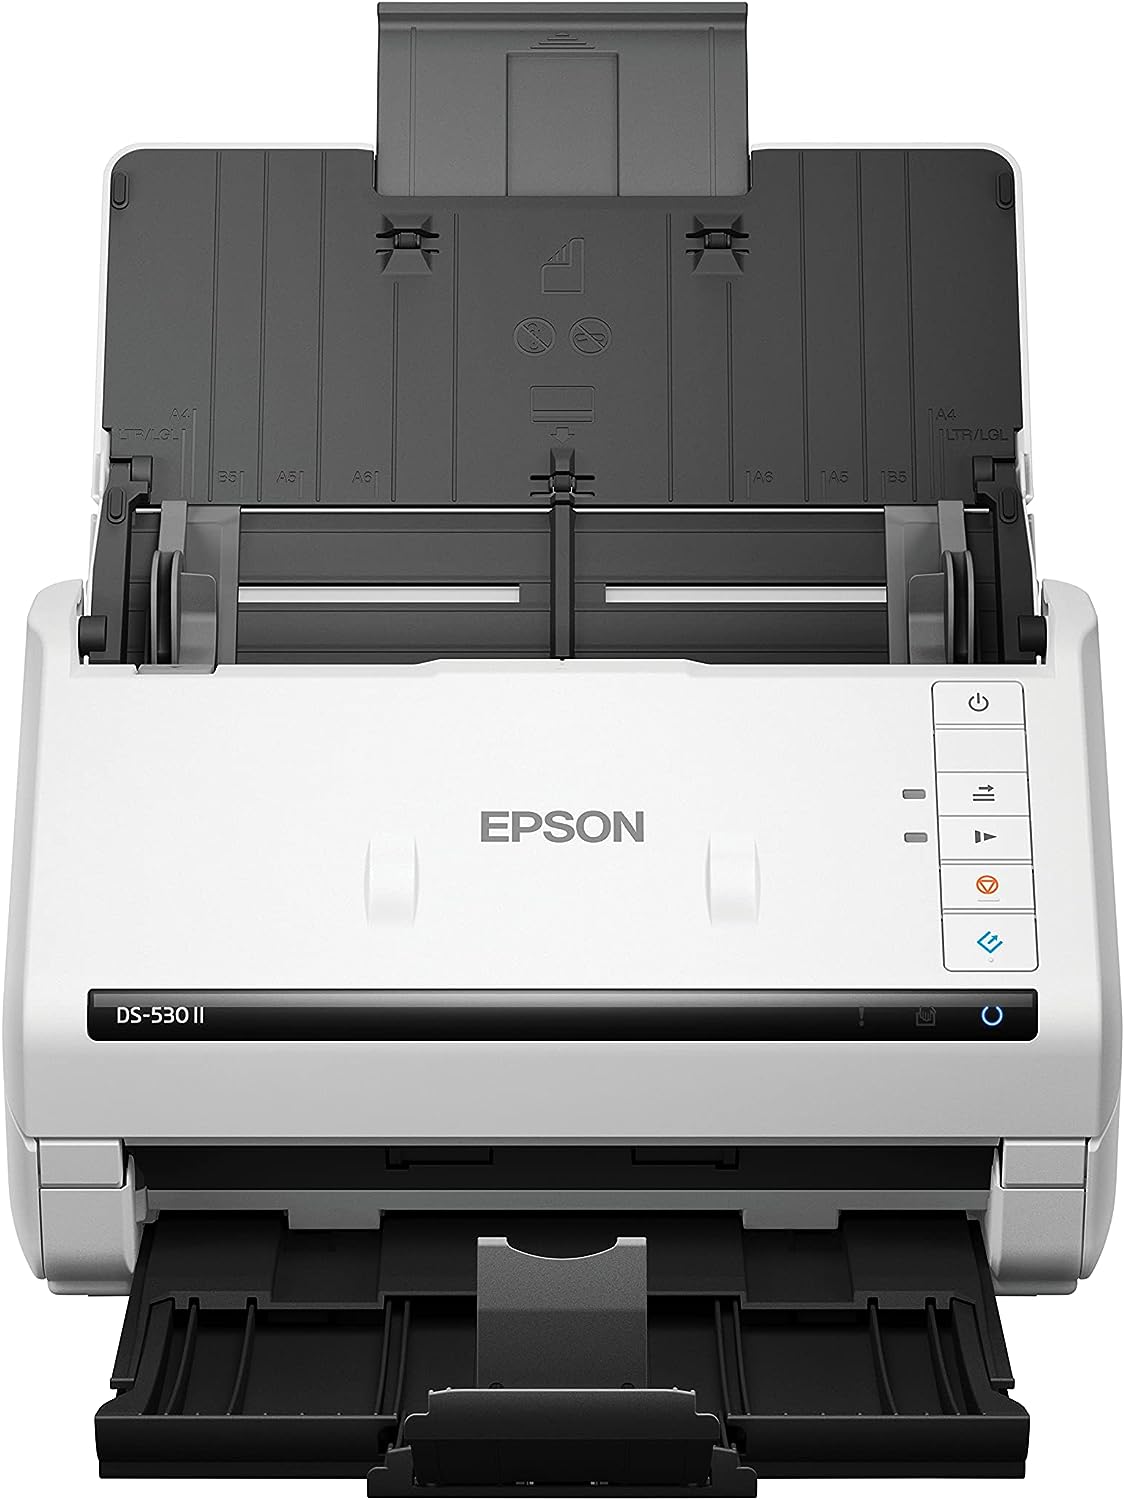 Epson DS-530 II Color Duplex Document Scanner for PC [...]